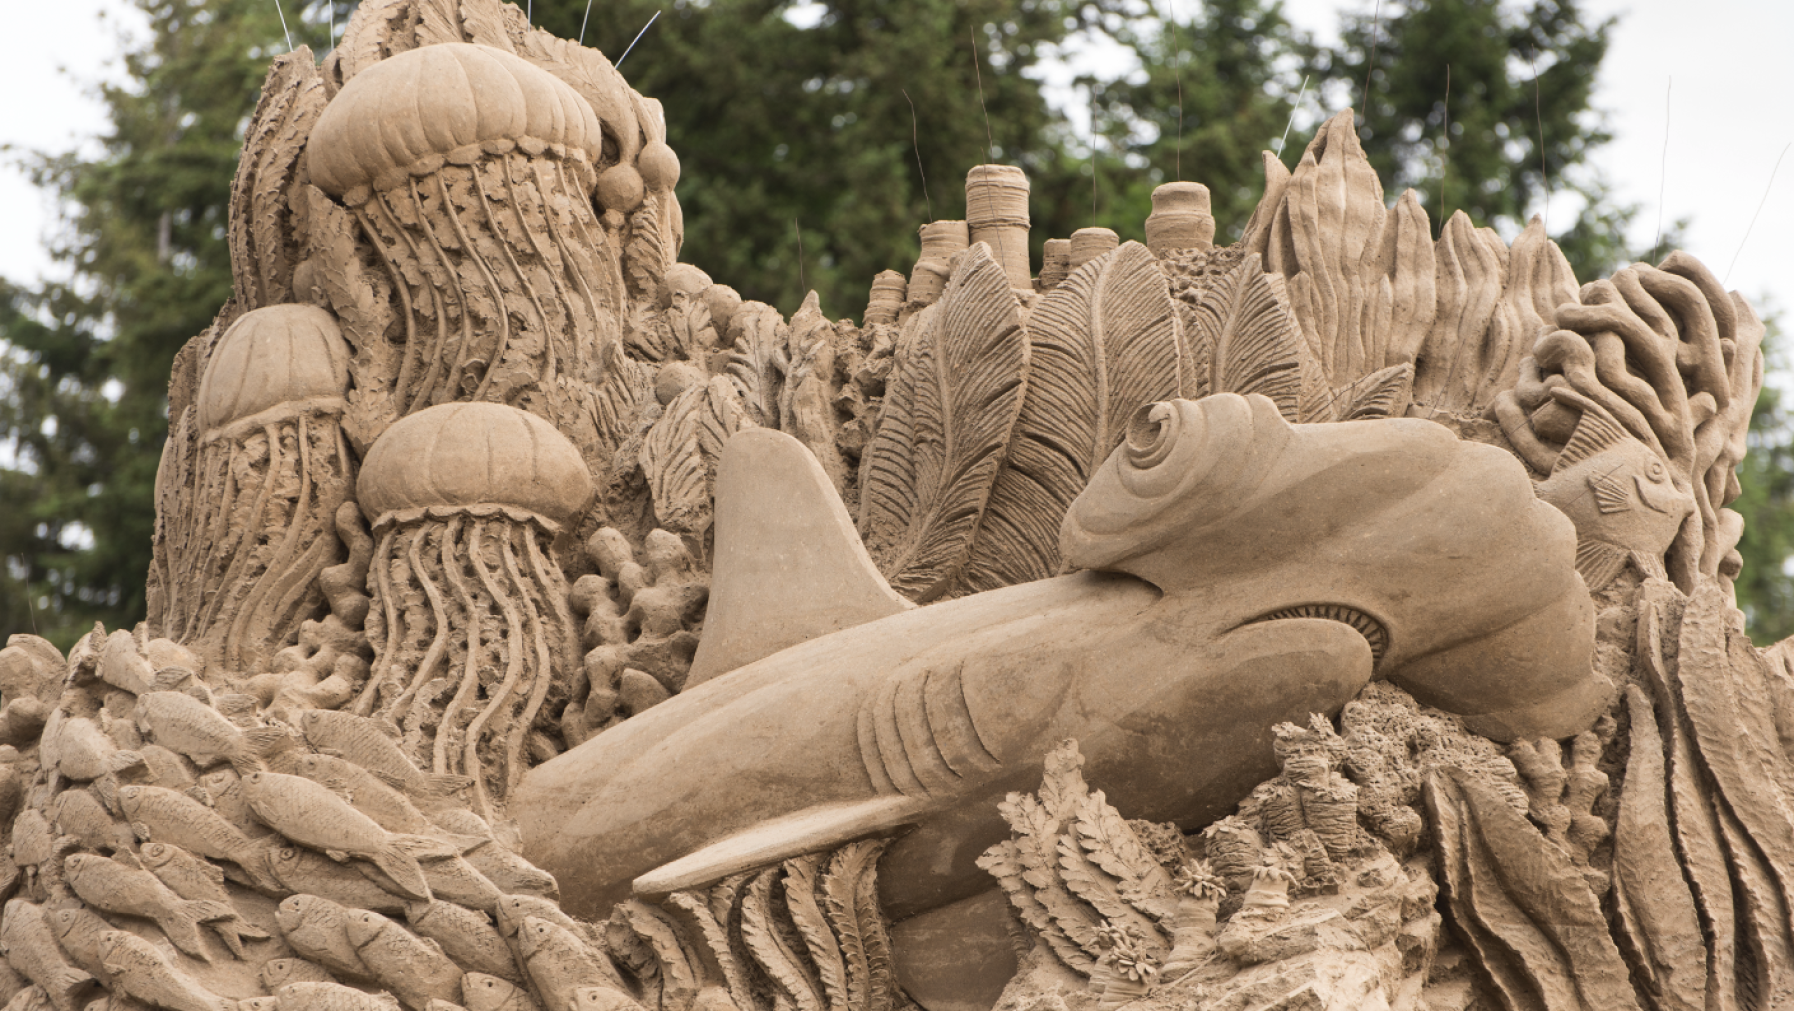 Details of a sand sculpture including jellyfish and a hammerhead shark